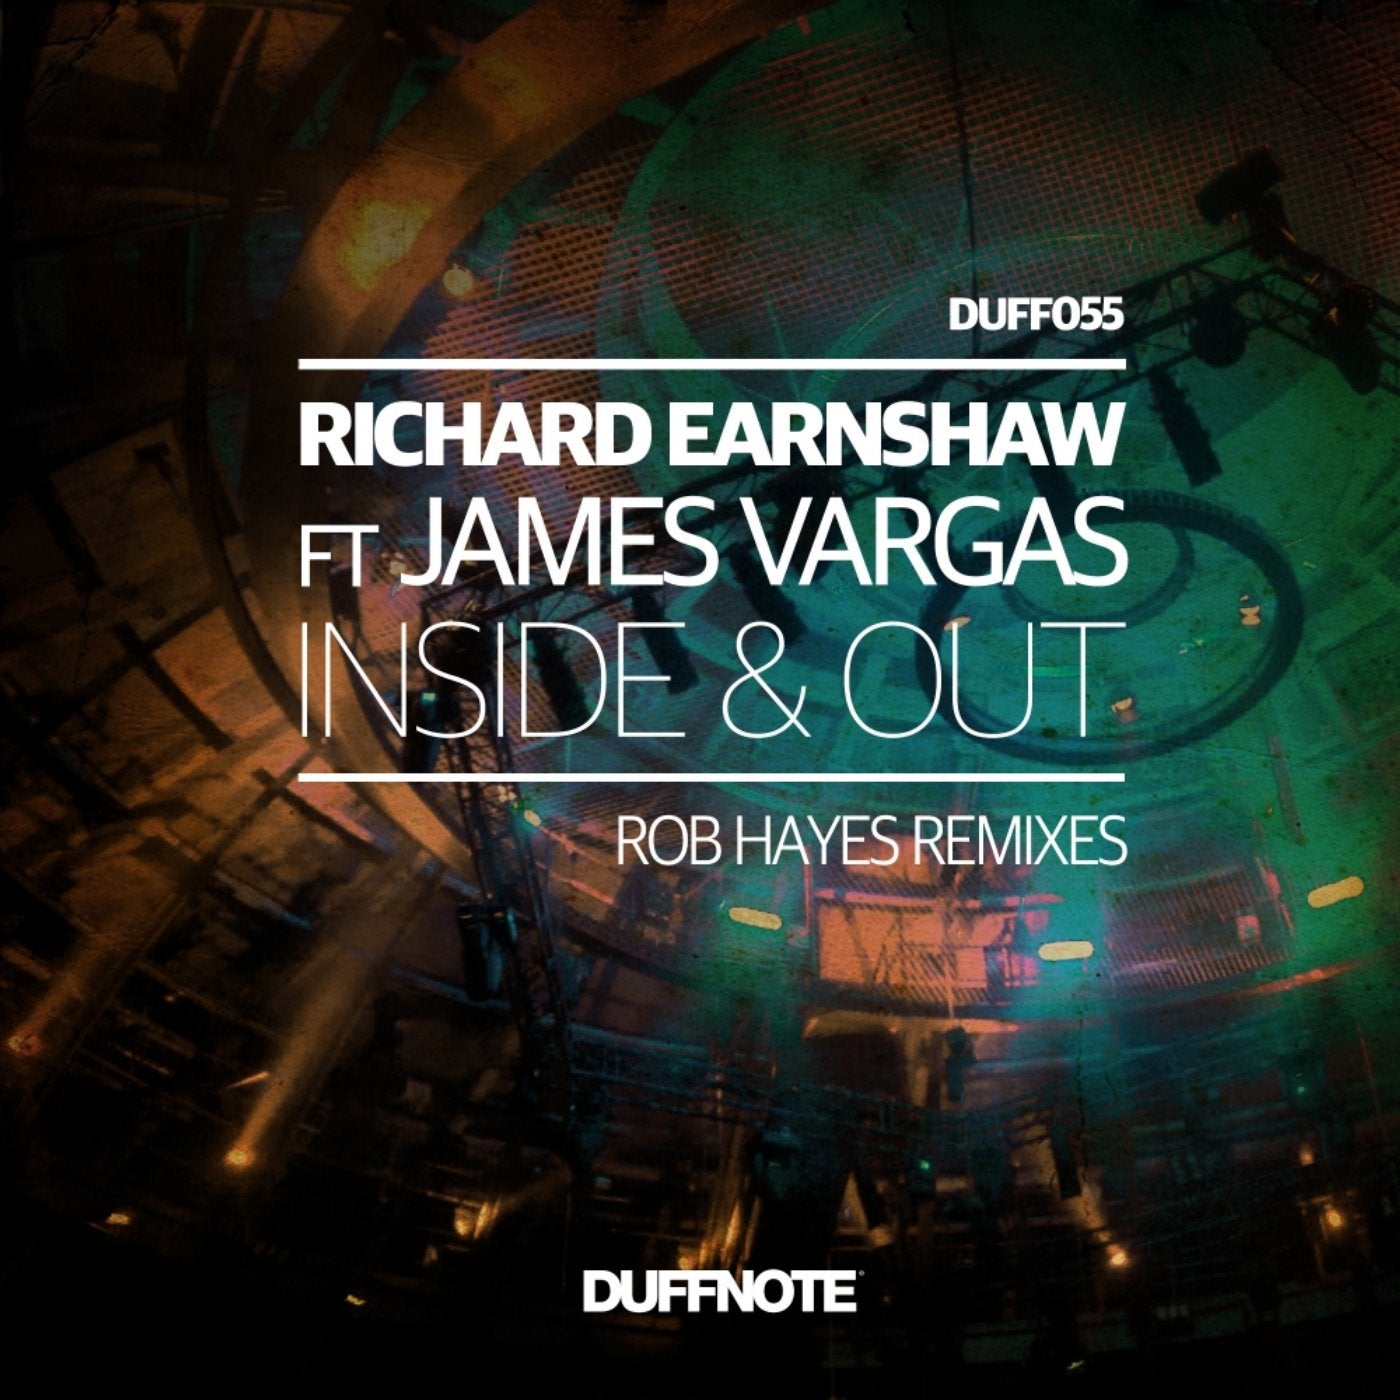 Inside & Out - Rob Hayes Remixes